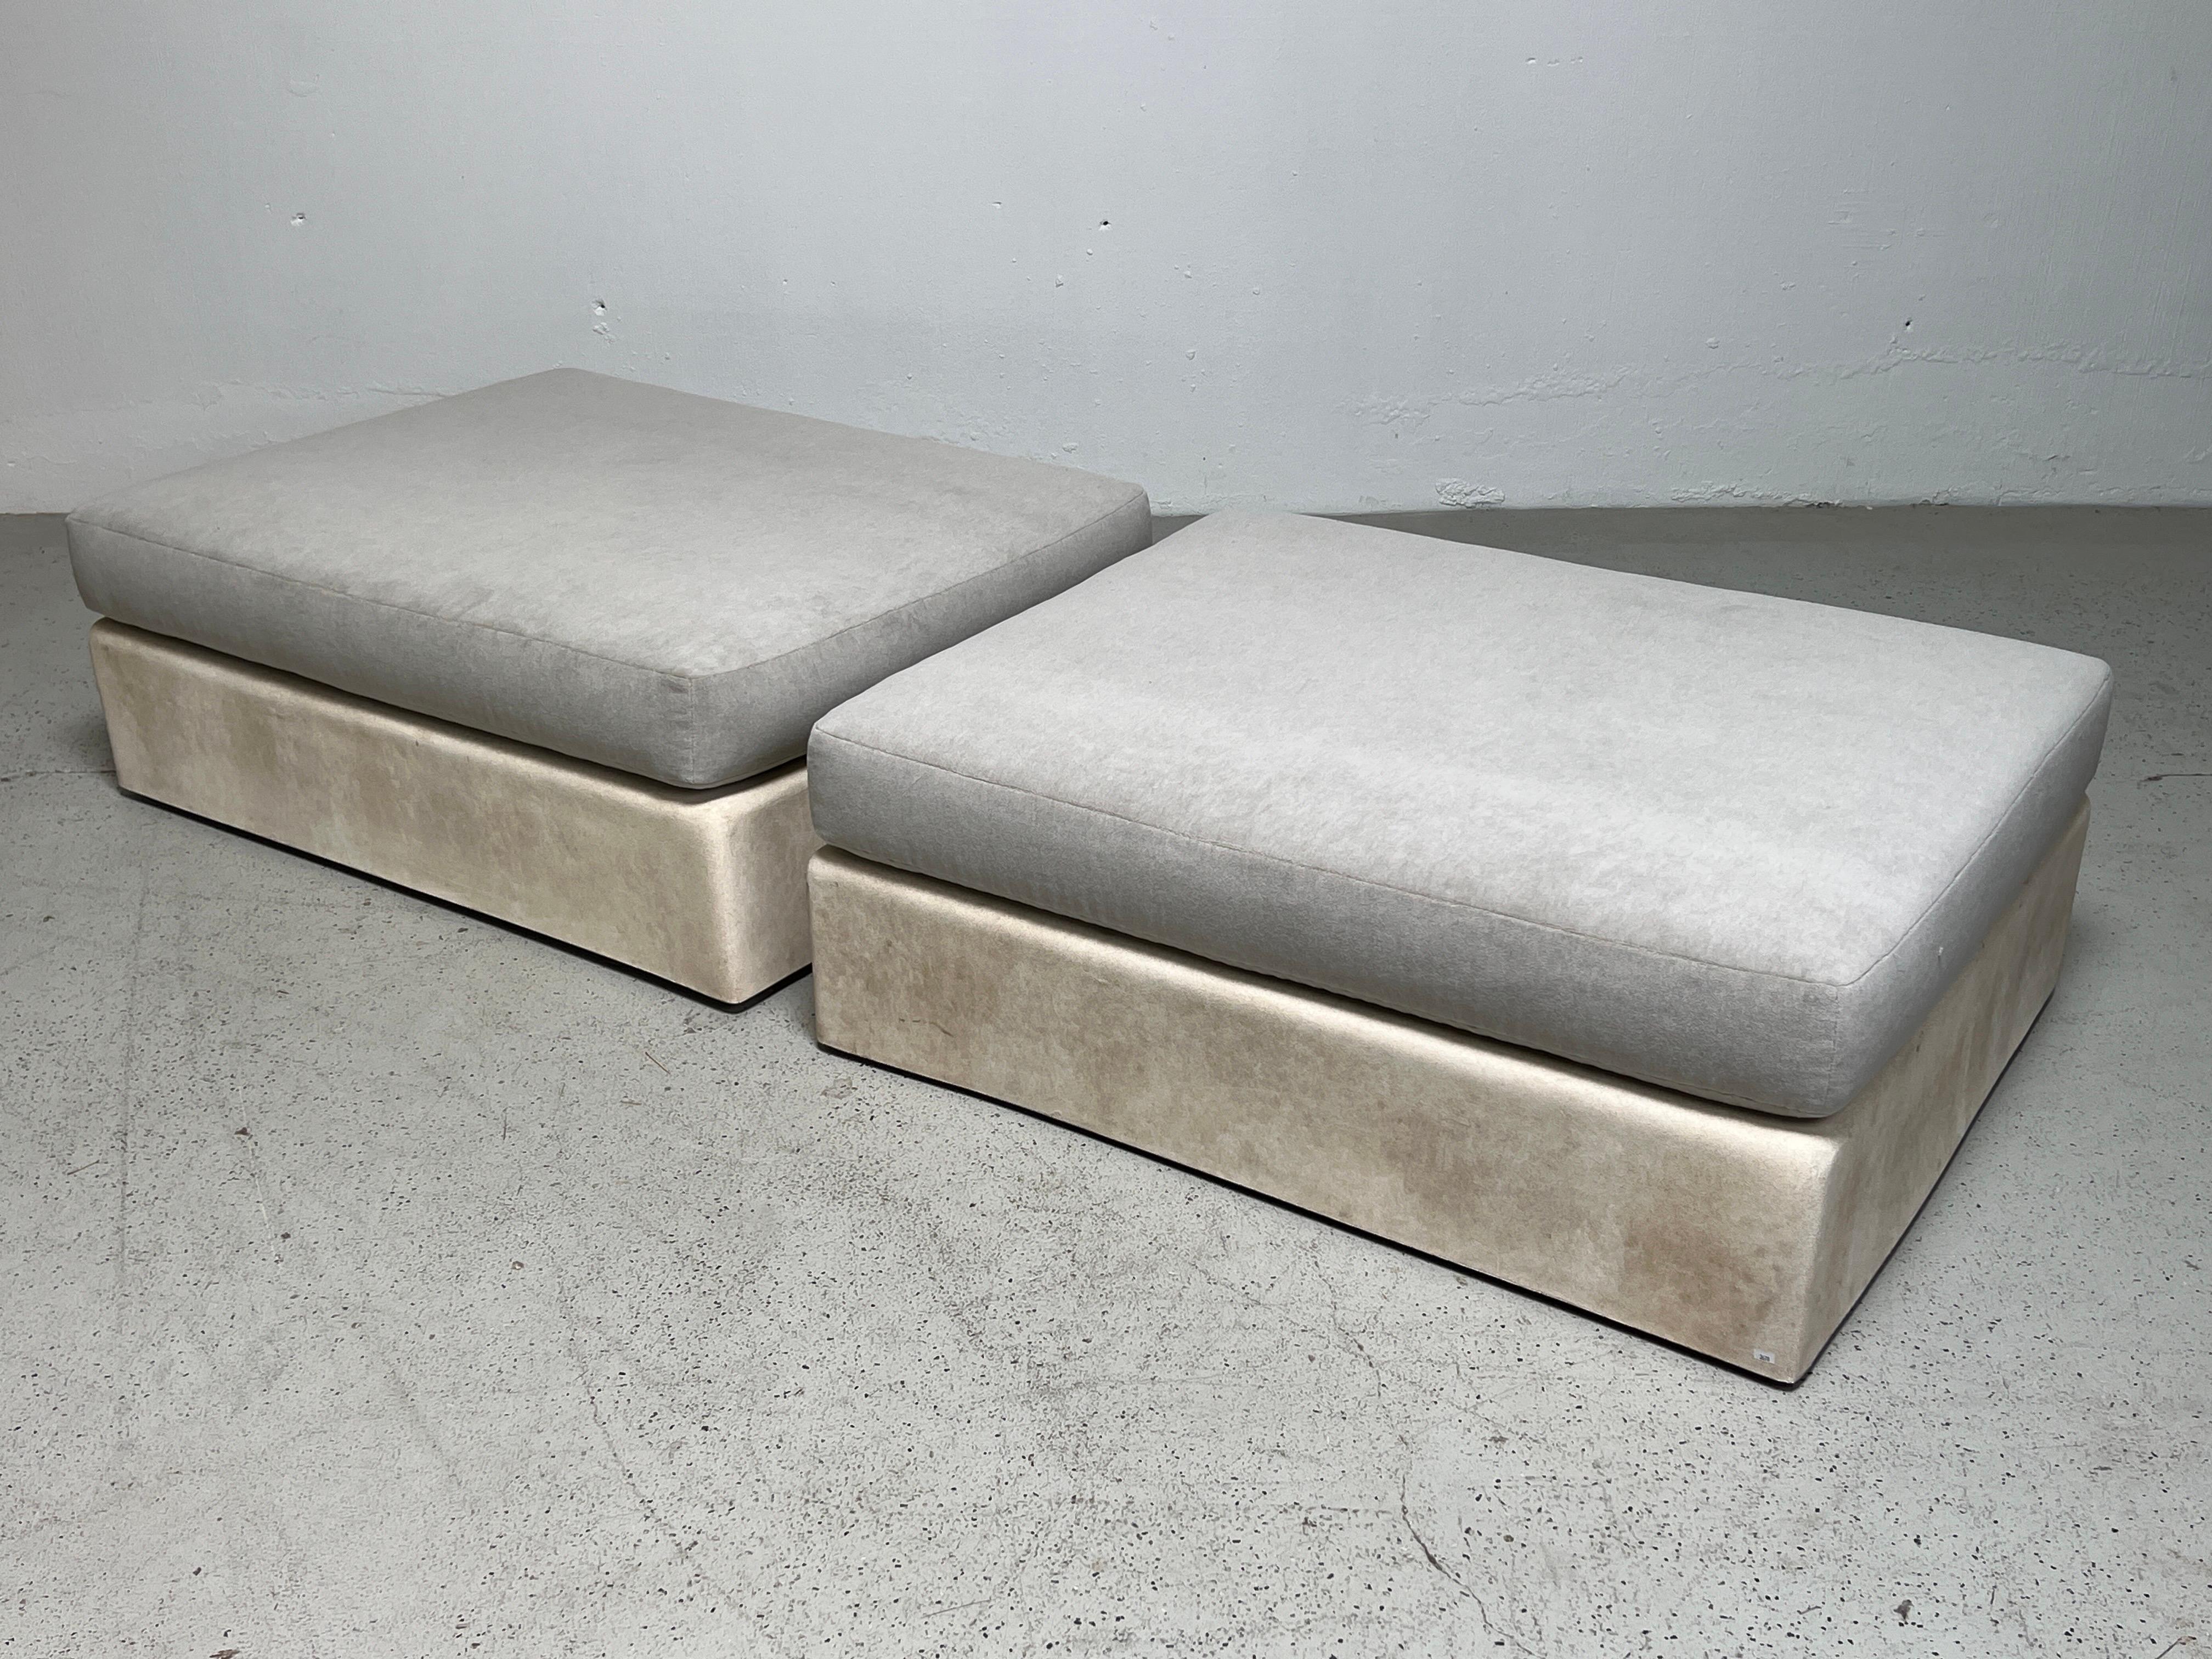 A pair of large scale Jennifer ottomans designed by Michael Taylor. The fiberglass frames are covered in a Spanish plaster finish and sit on hidden casters. Each ottoman weights approximately 100 pounds. These have been reupholstered in Holly Hunt /